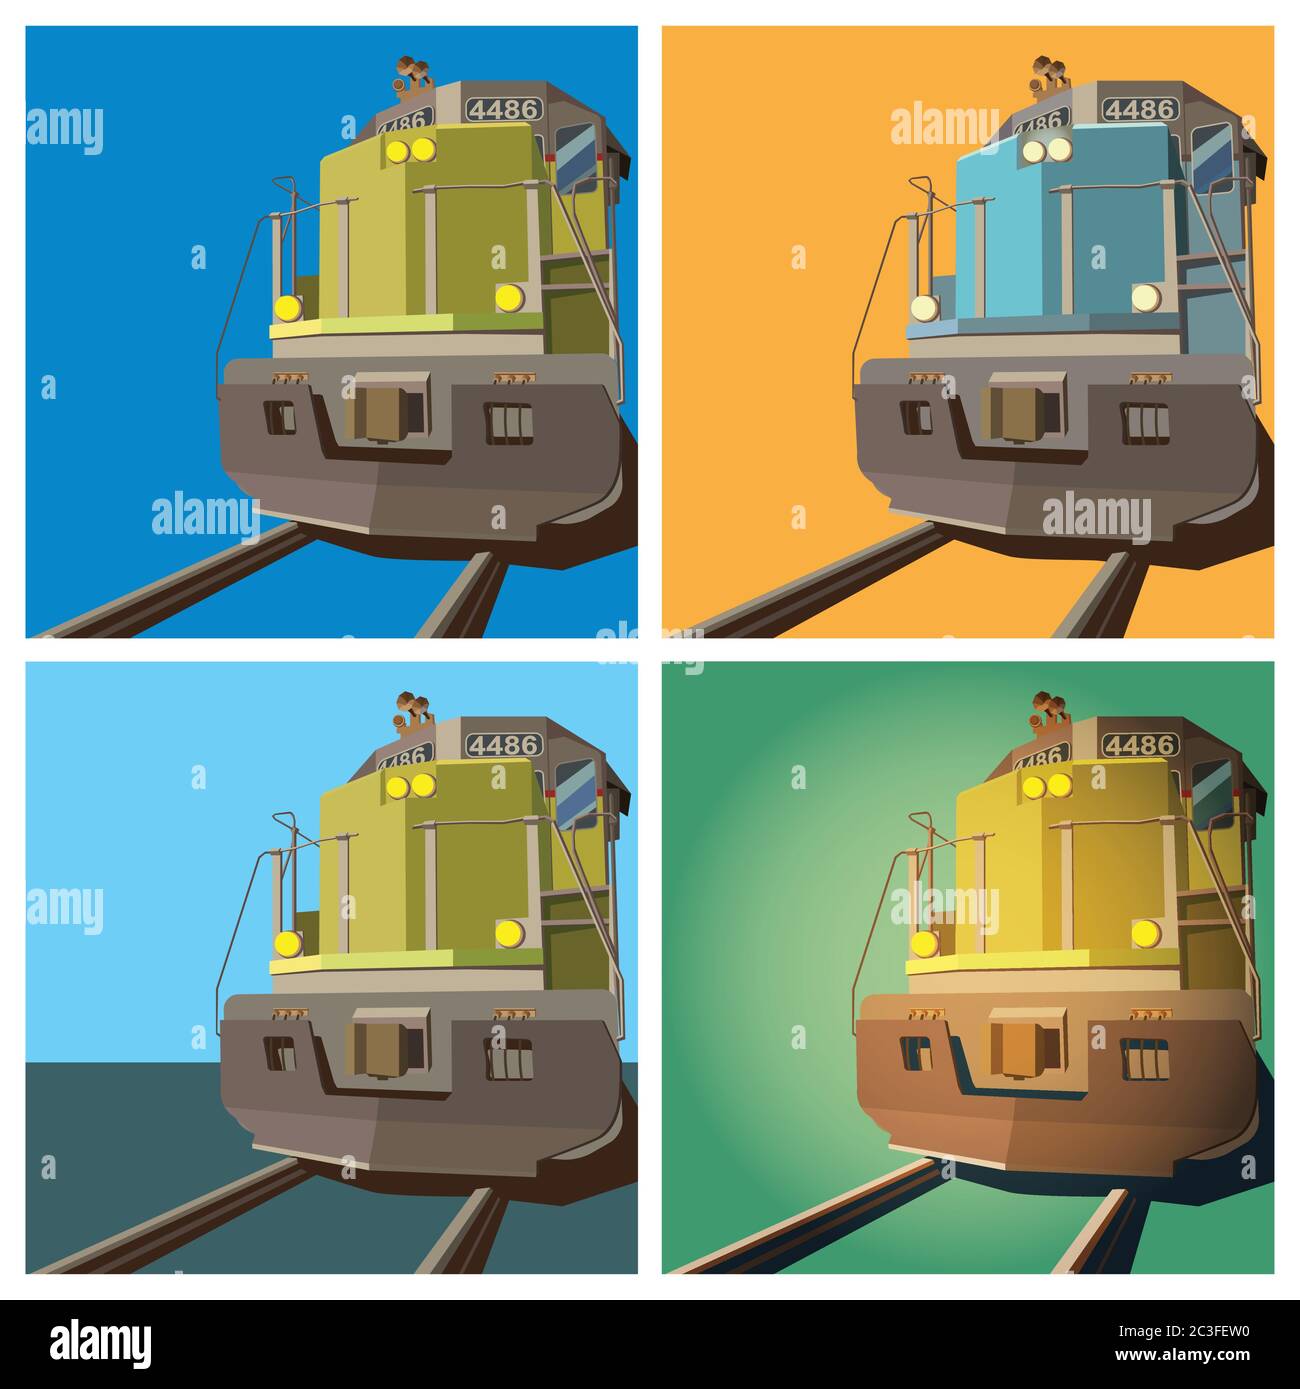 stylized vector illustration on the theme of railway transport. locomotive in different colors Stock Vector